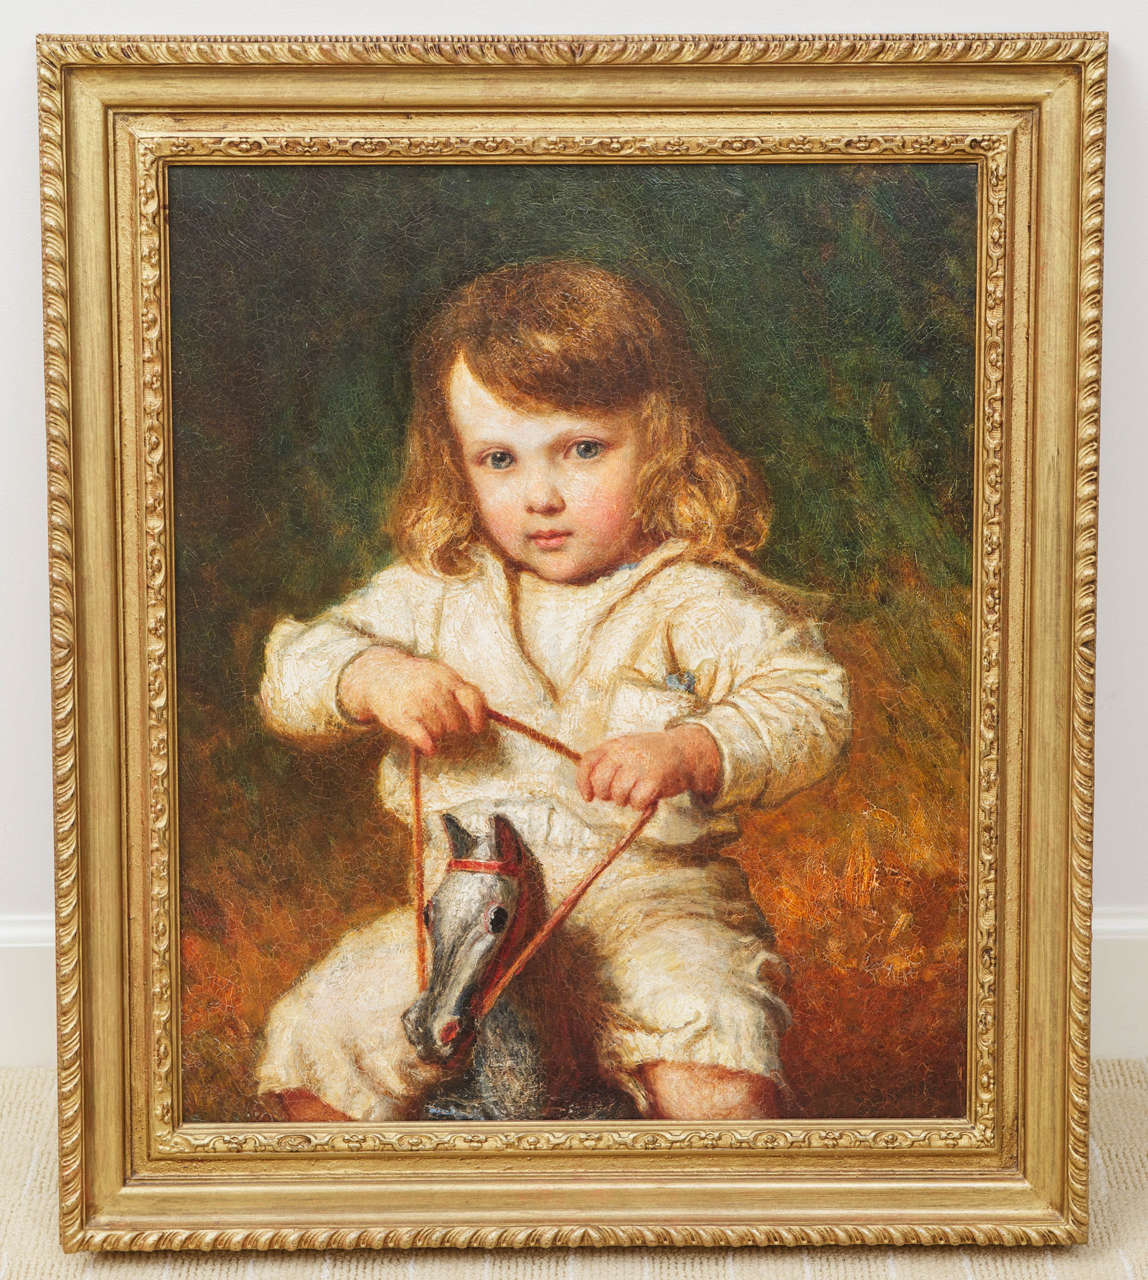 Bauerle (German, 1831 - 1912), is known especially for his depictions of children.  He came to England as a portrait artist to paint all of Queen Victoria's children and continued to paint many of the English aristocracy.  

Canvas measures: 23